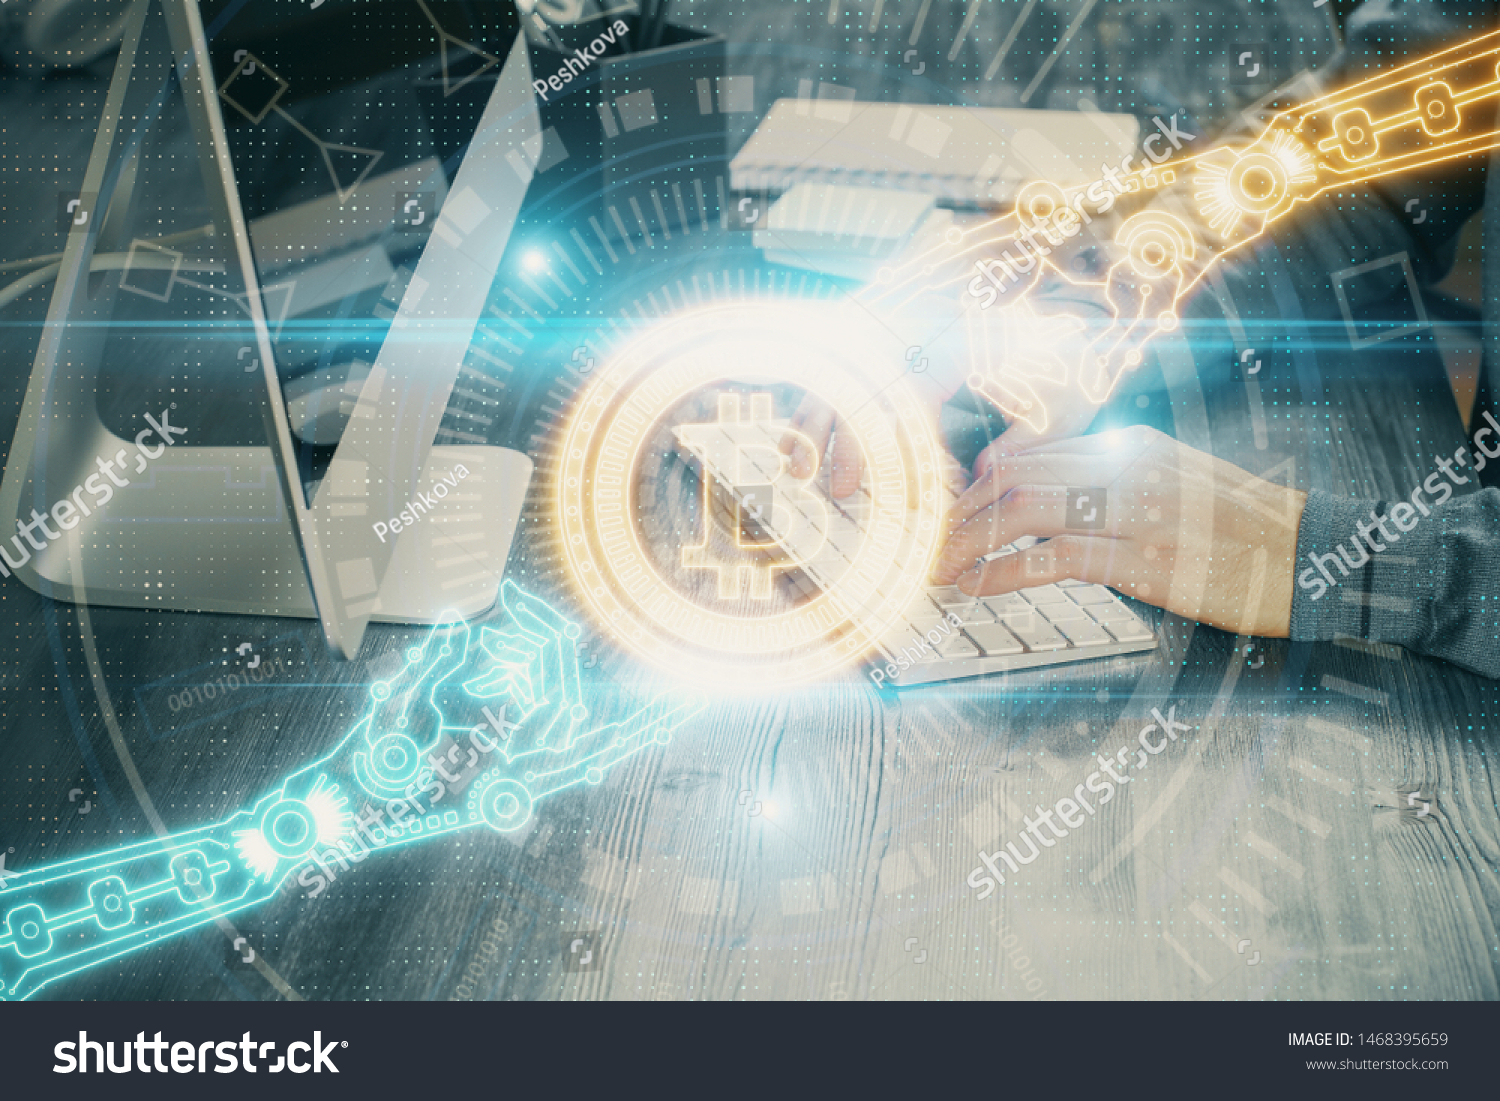 Blockchain theme hud with businessman working on computer on background. Concept of crypto chain. Multi exposure. #1468395659